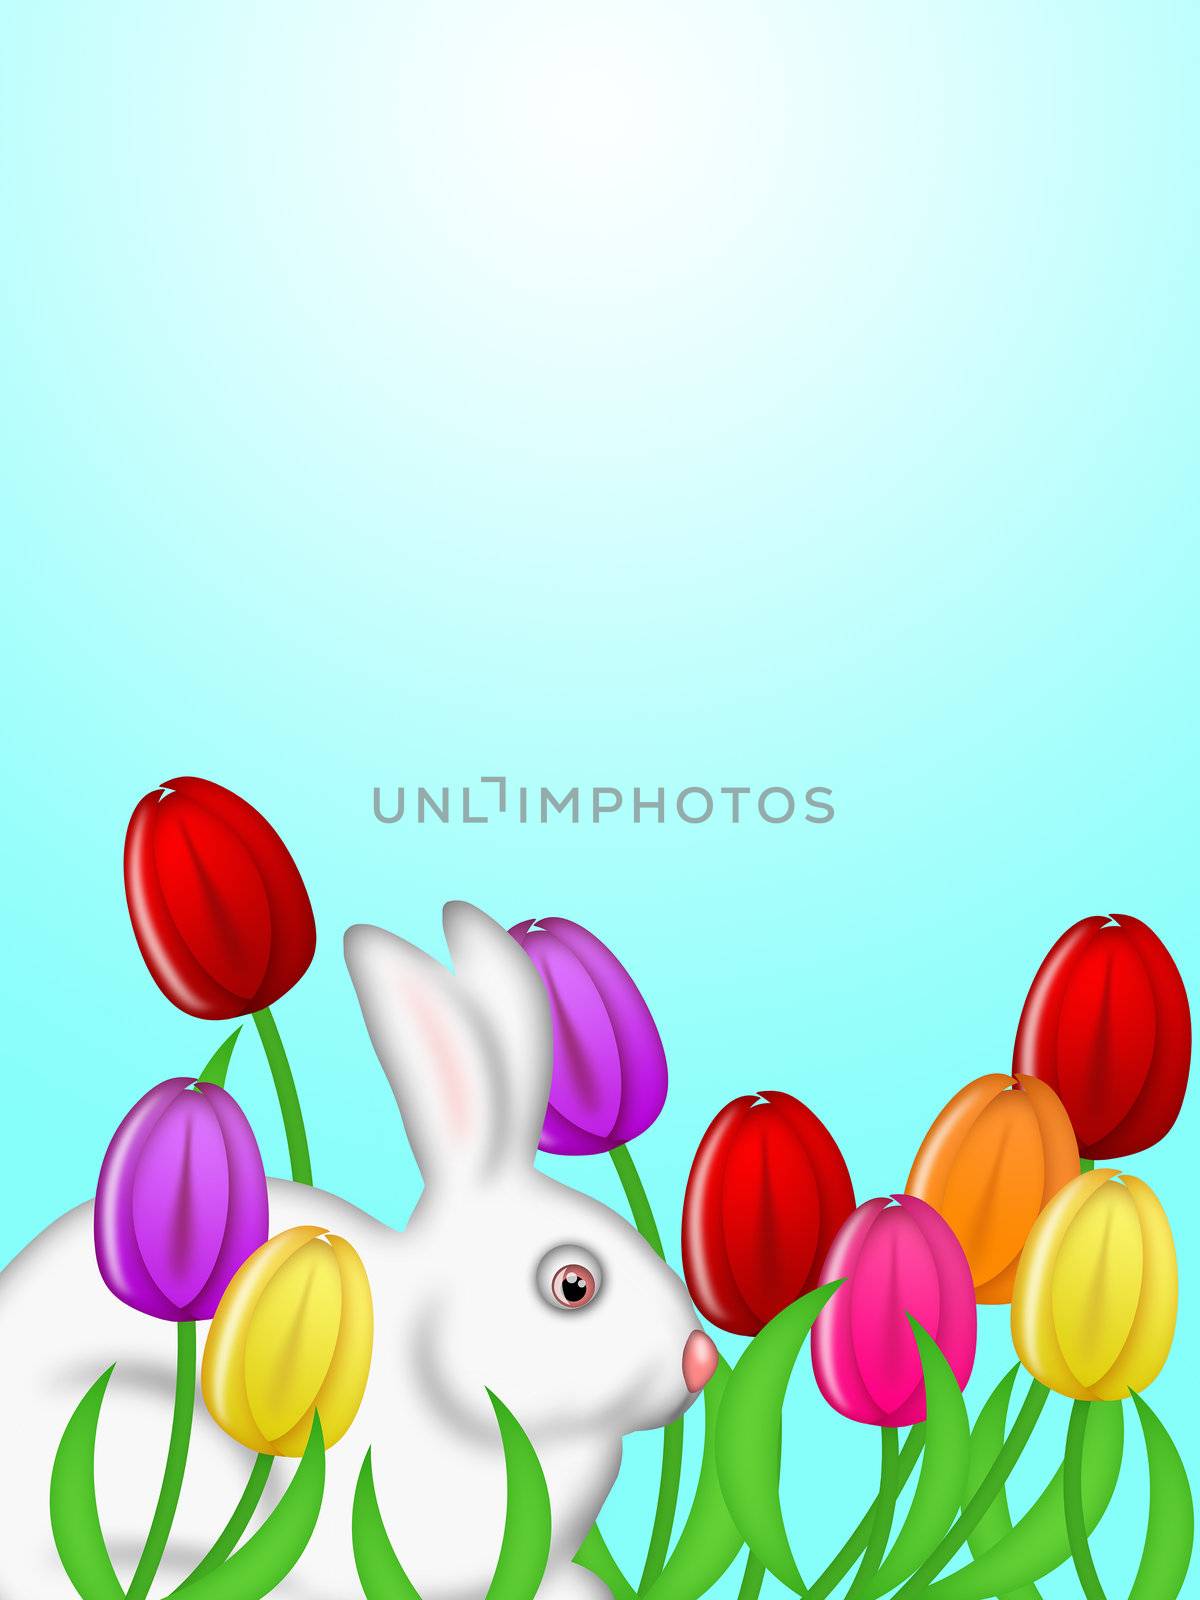 White Easter Bunny in Colorful Tulips Flower Field Illustration